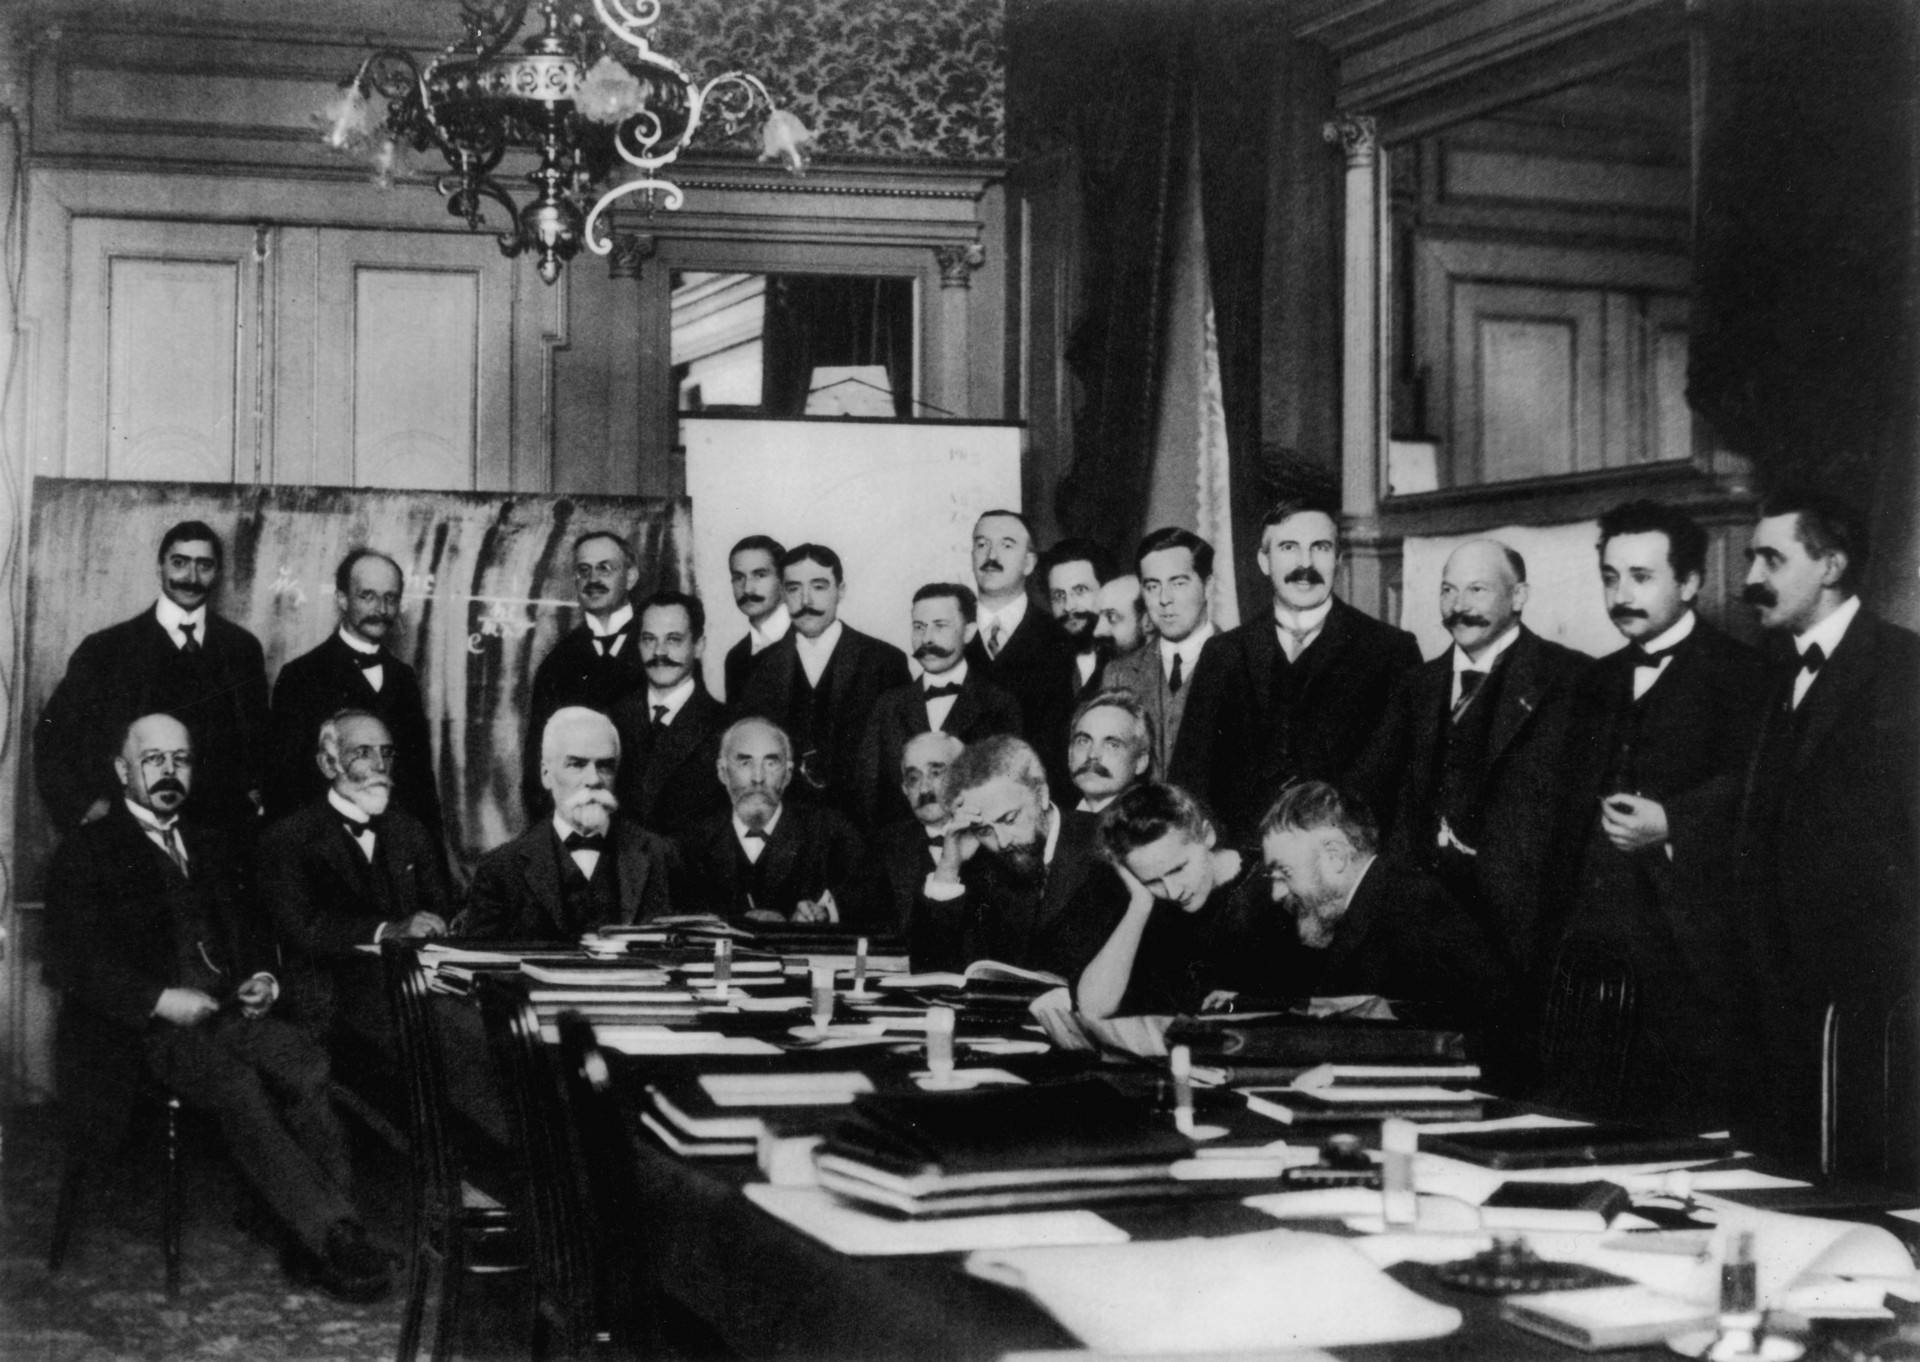 This is a photograph of a meeting of 23 men and Marie Curie at the 1911 Solvay Conference. They all sit or stand around a table covered in notebooks and other work materials.